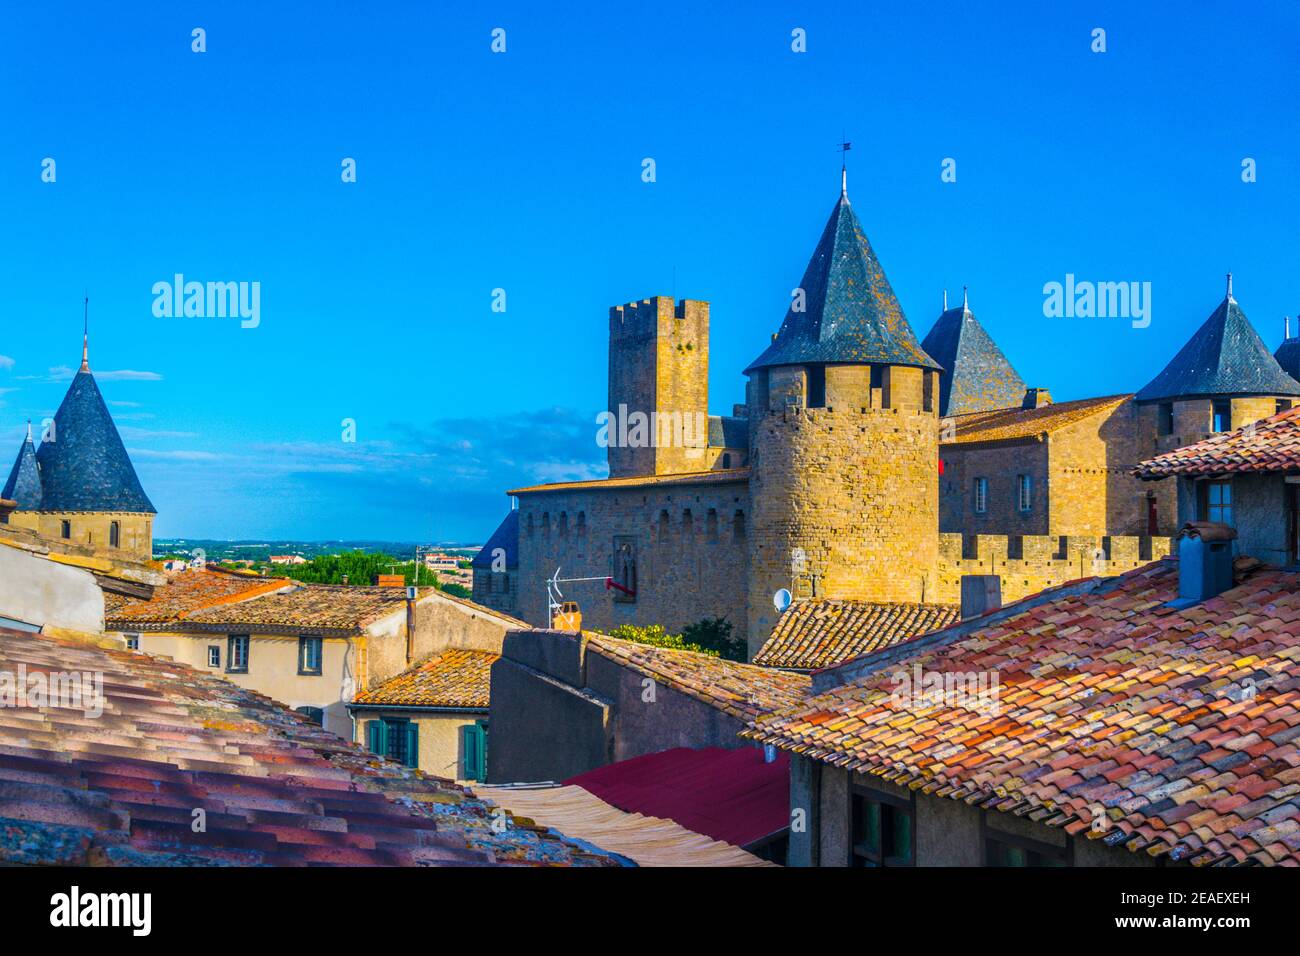 Aerial view of the old town of Carcassonne, France Stock Photo